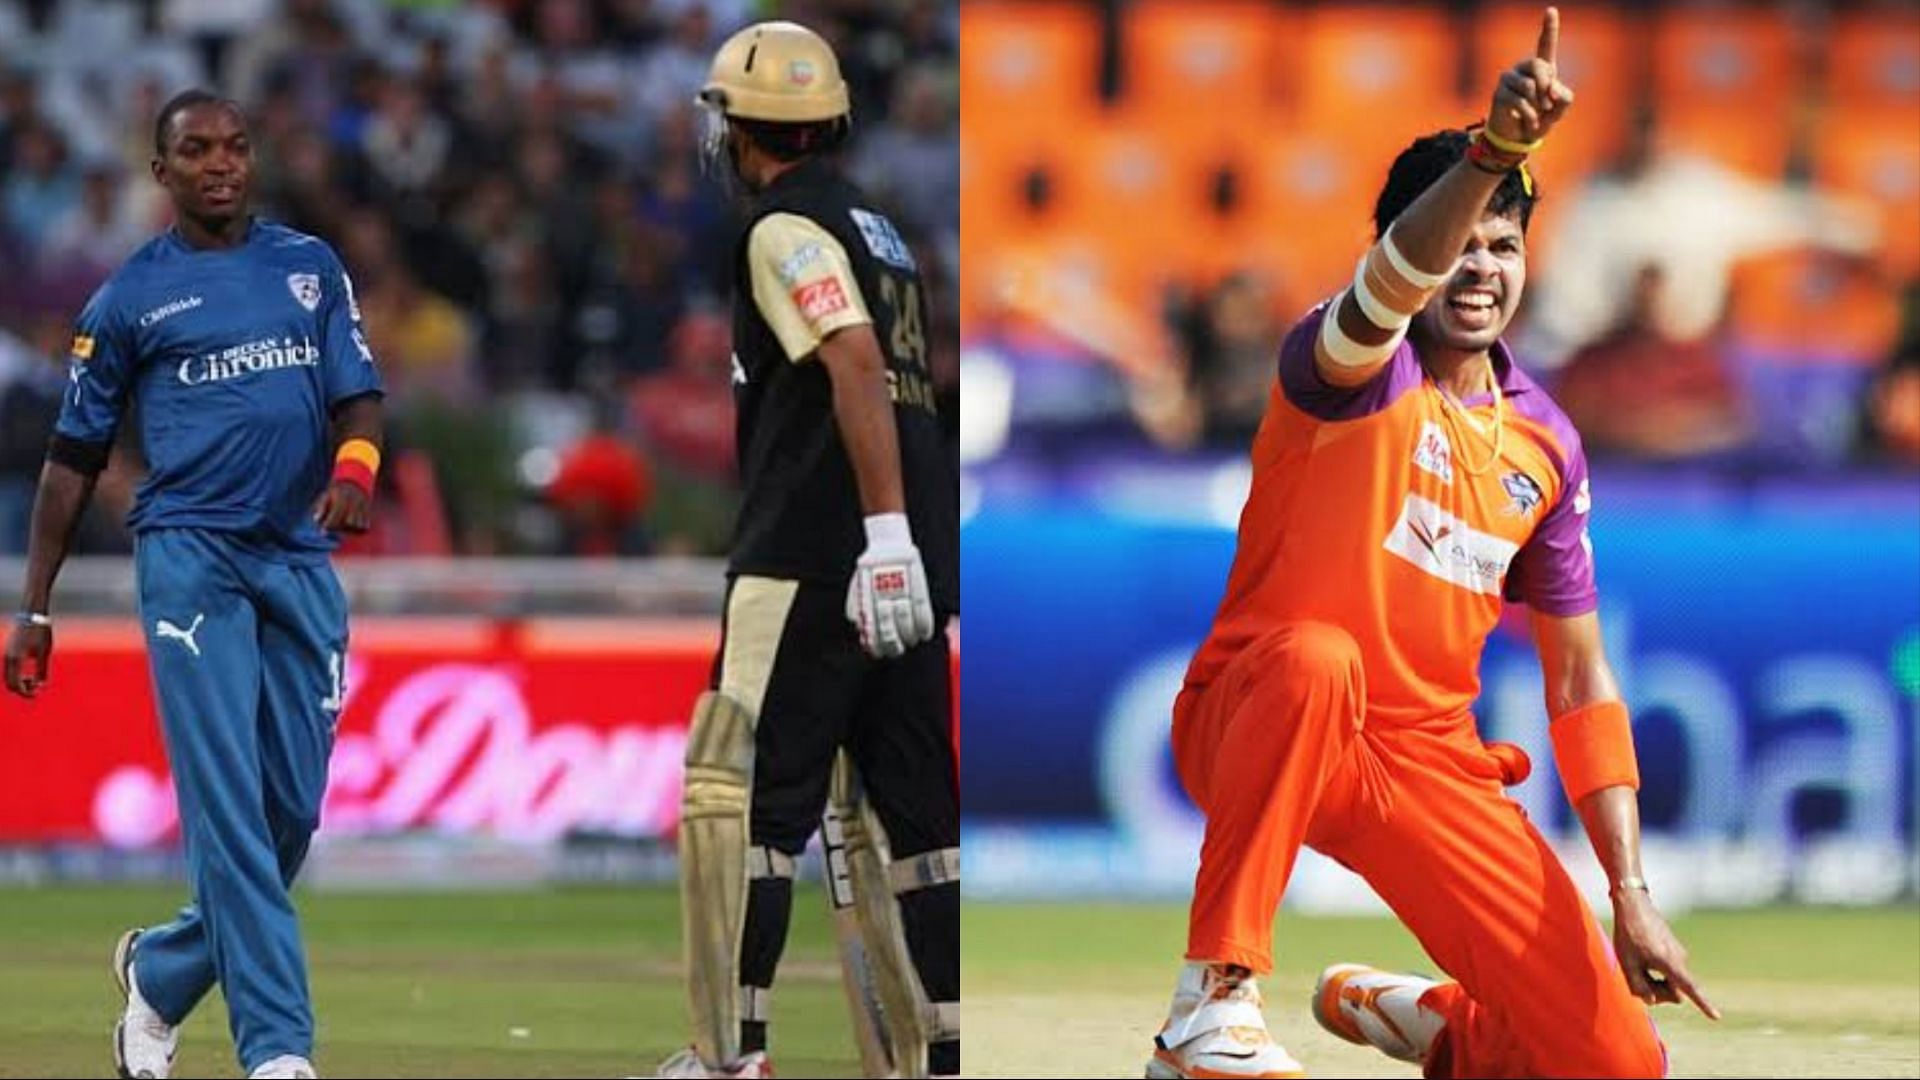 Fidel Edwards (in blue) and Sreesanth (in orange) are among the oldest players in IPL 2022 Auction